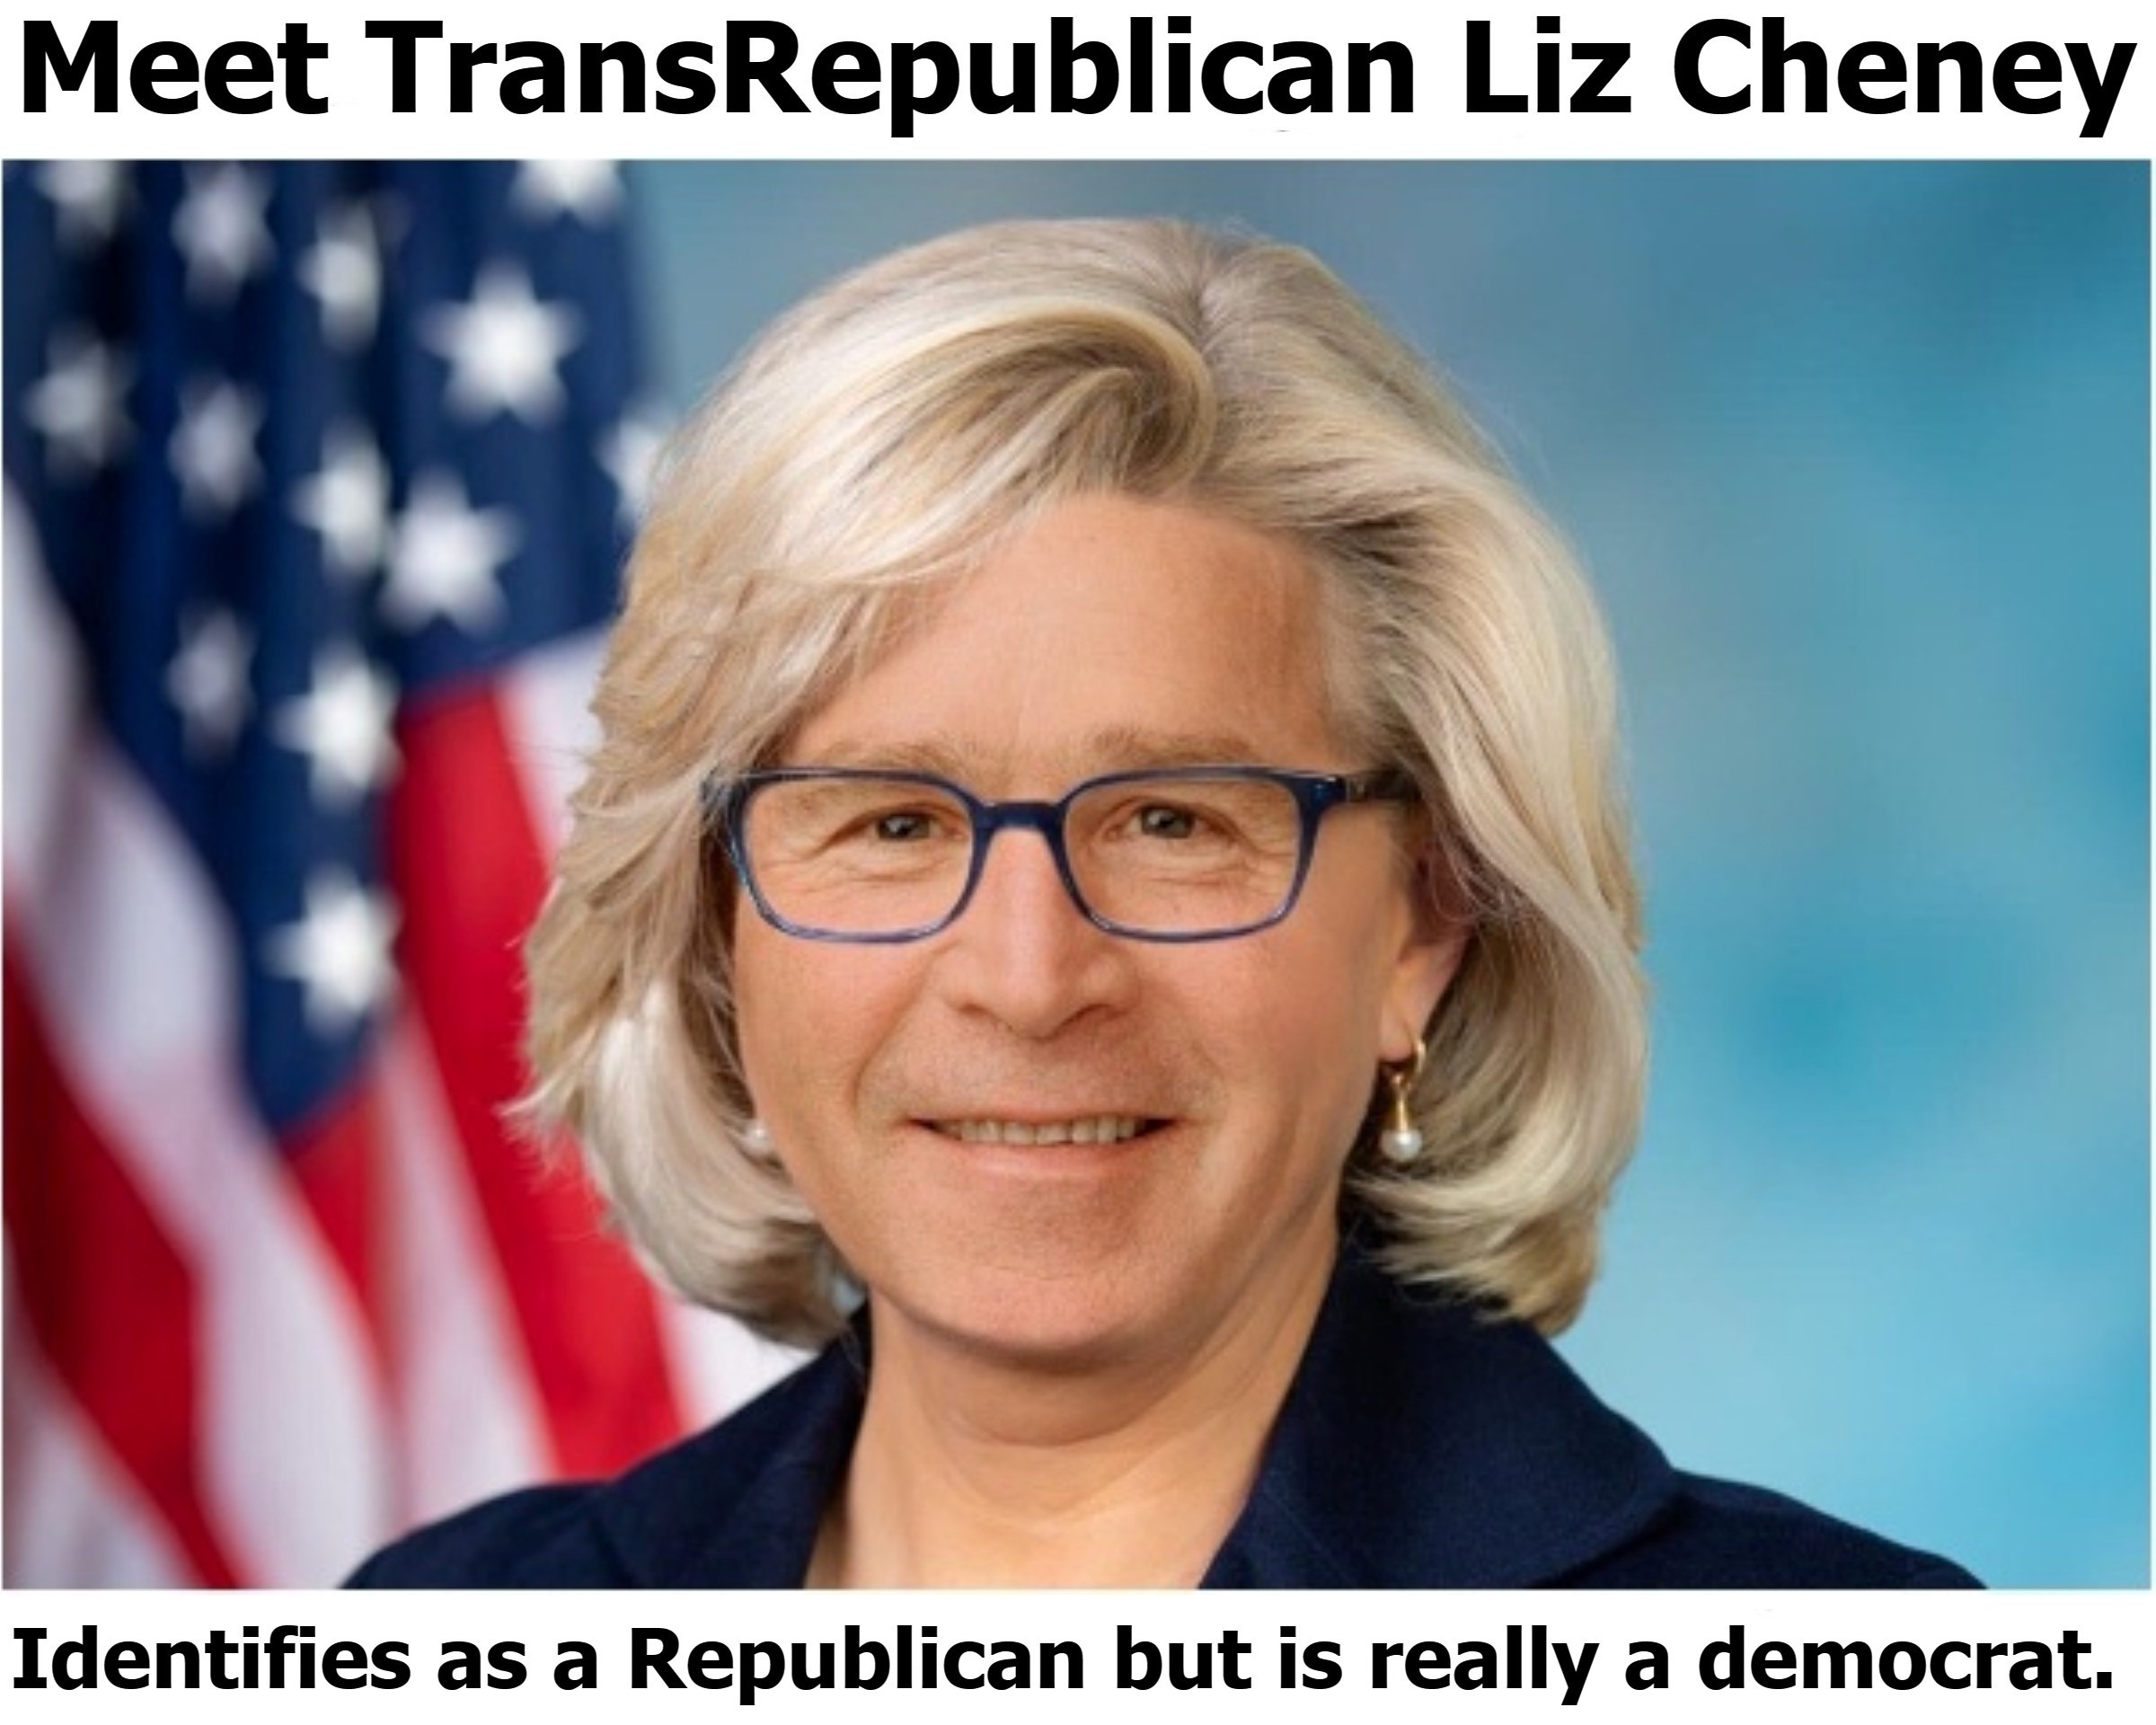 Meet TransRepublican Liz Cheney | image tagged in lizard lips,liz cheney,transrepublican,rino,all in the family,bush clinton crime families | made w/ Imgflip meme maker